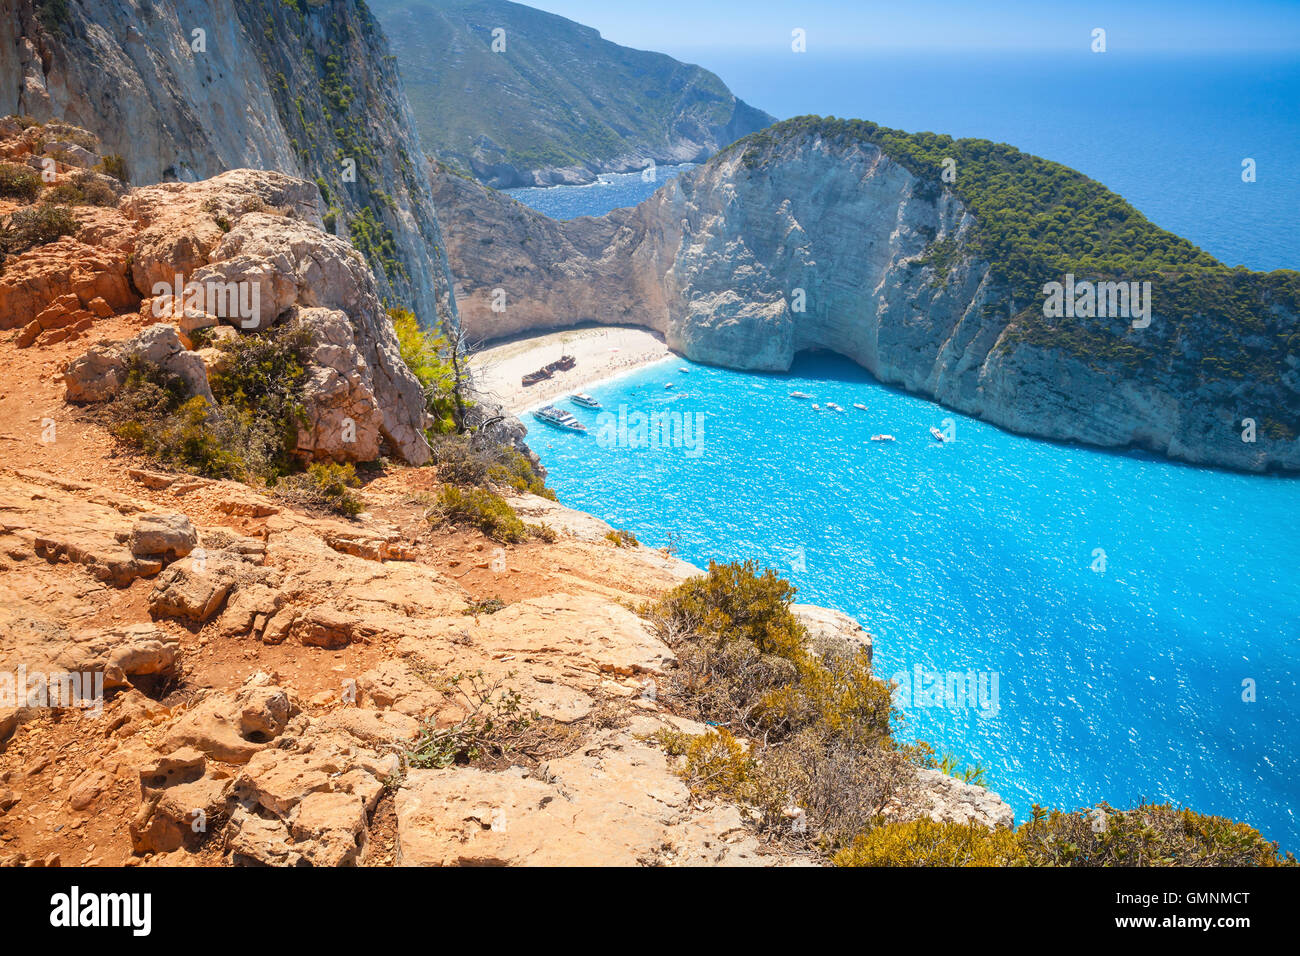 Navagio or Shipwreck beach. The most famous landmark of Greek island Zakynthos in the Ionian Sea Stock Photo